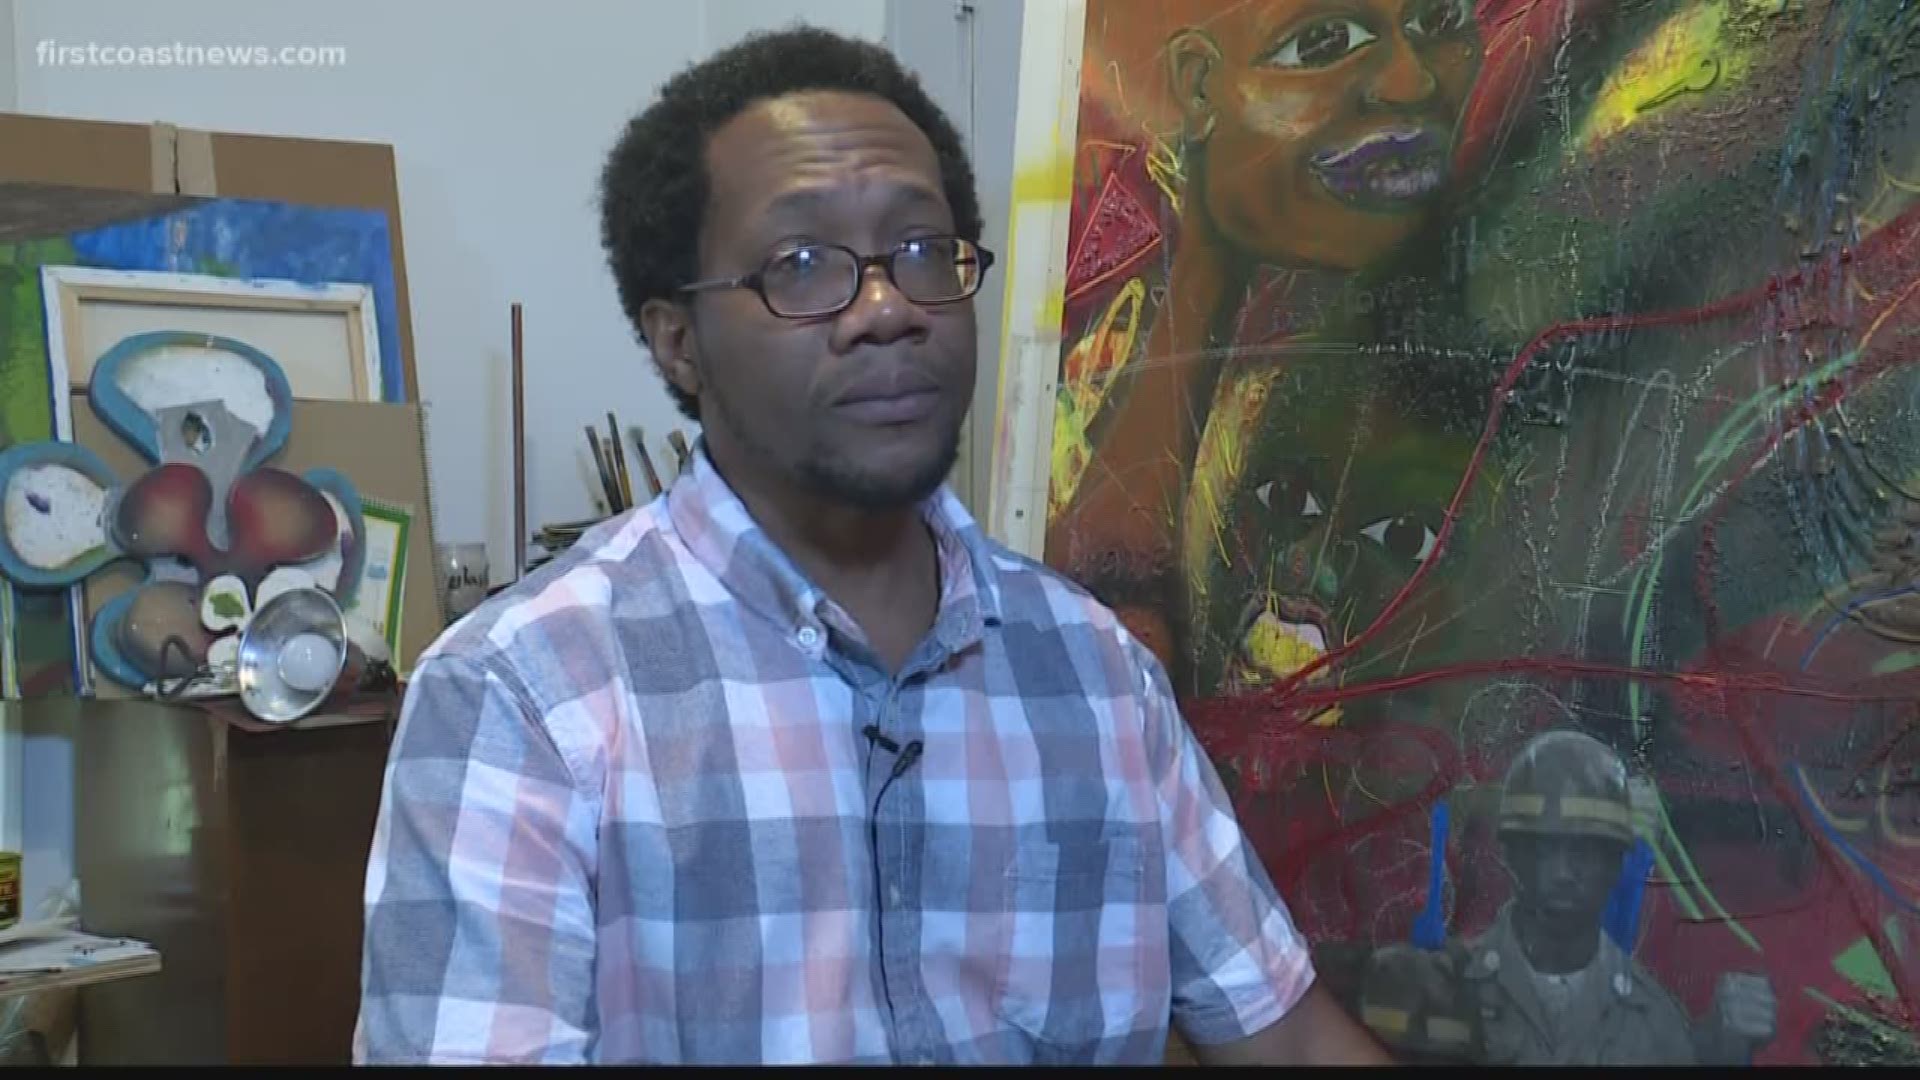 El Faro sank 15,000 feet below the sea taking 33 lives - fathers, husbands, sons and daughters. Roosevelt Watson, a Jacksonville artist, was commissioned to memorialize the crew on canvas; he said it was a difficult undertaking.